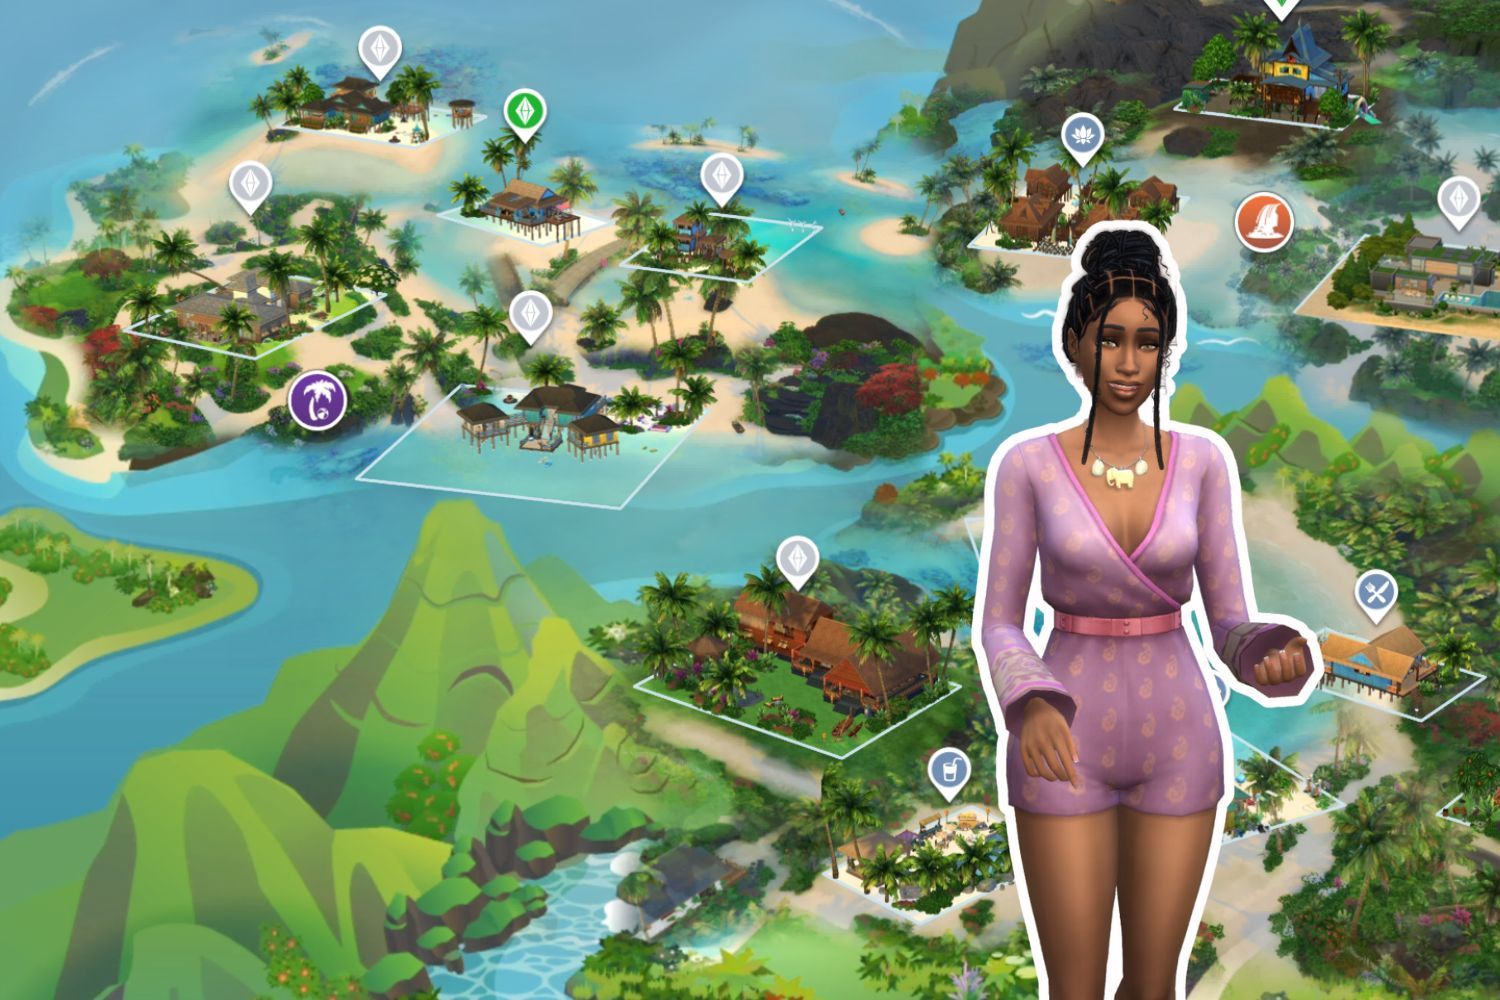 The same Sim from the above photos wears a beachy outfit in front of a map of Sulani.